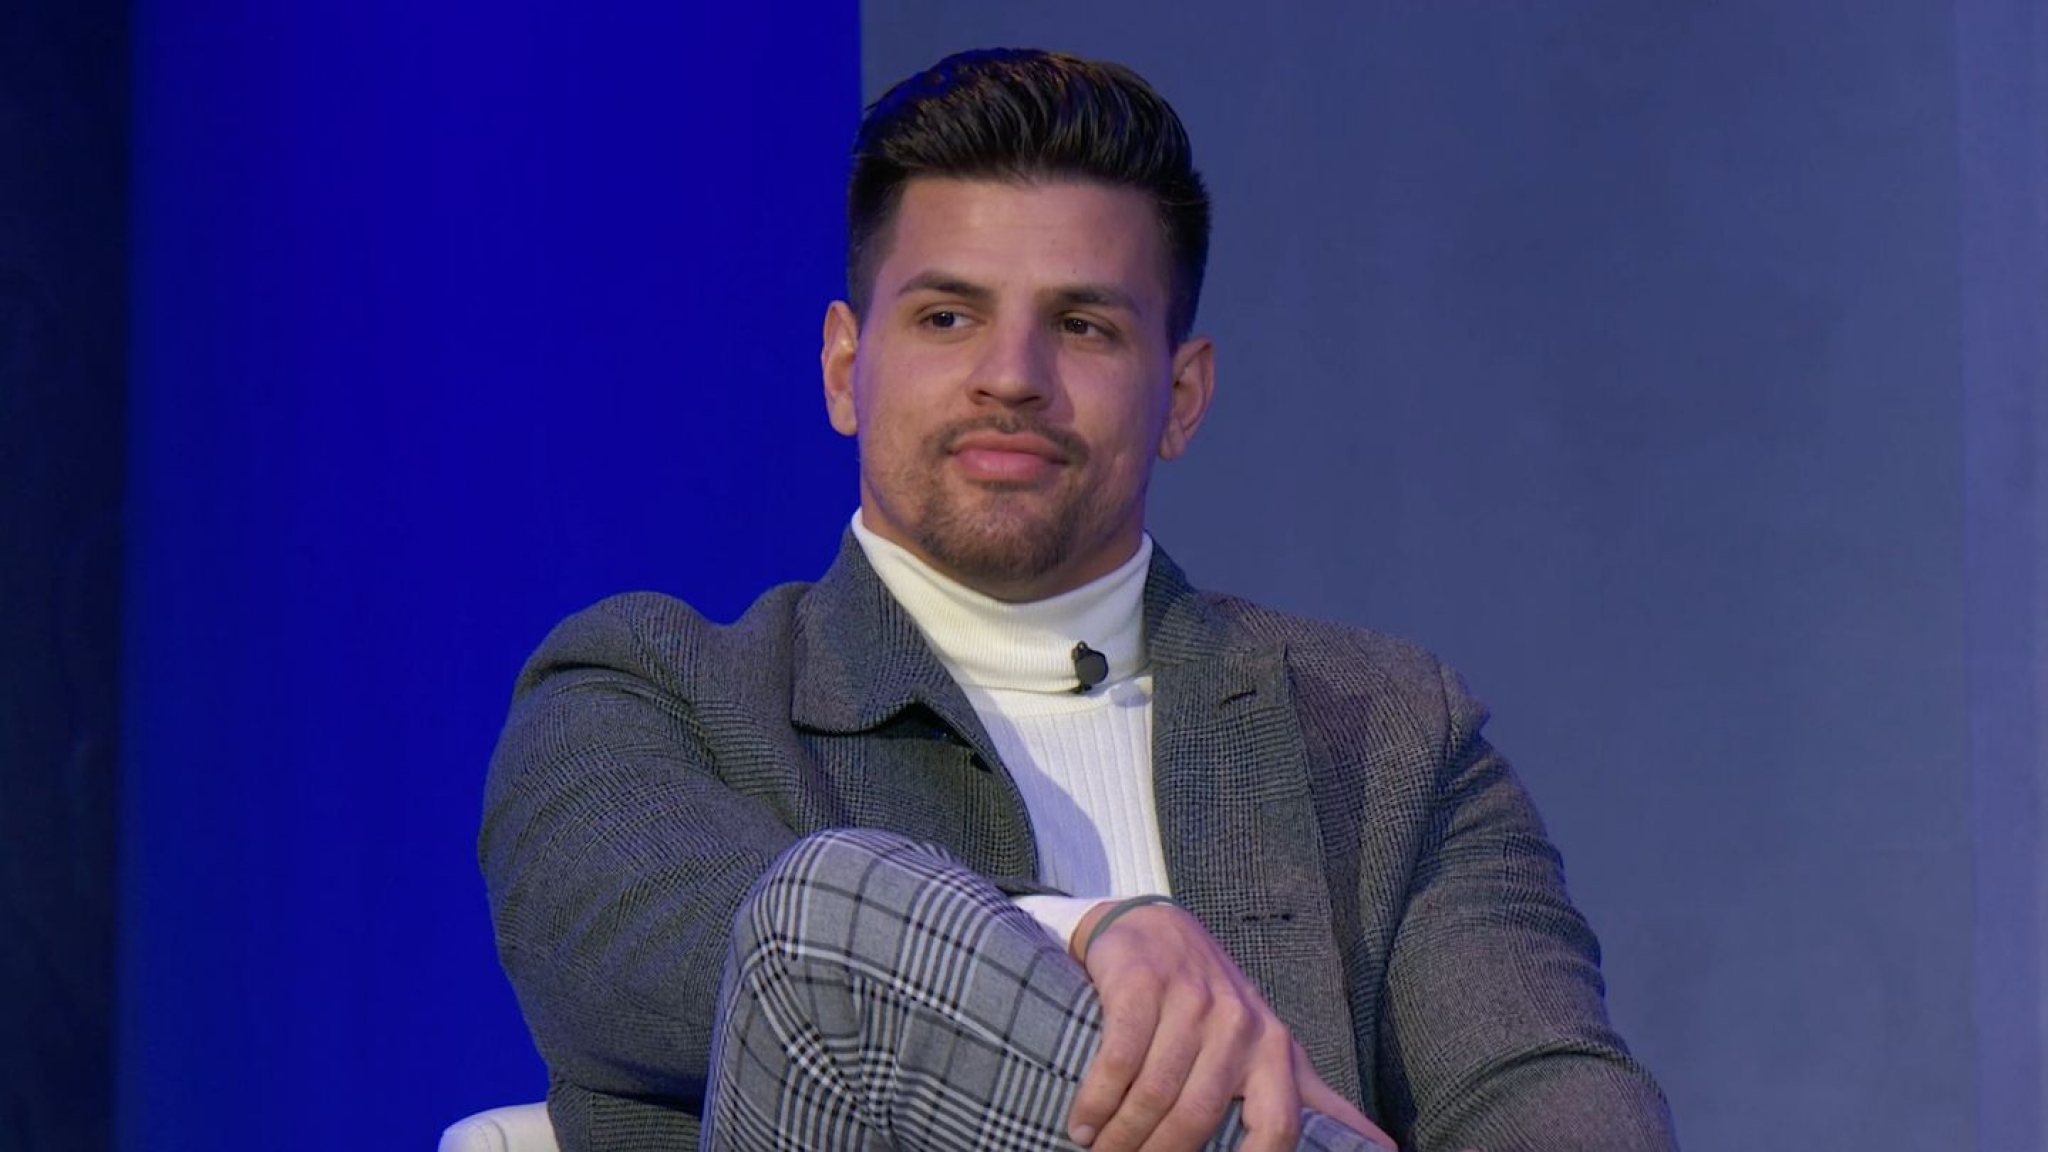 ‘We Connected’: Fessy And Tori Address Their Double Agents Relationship